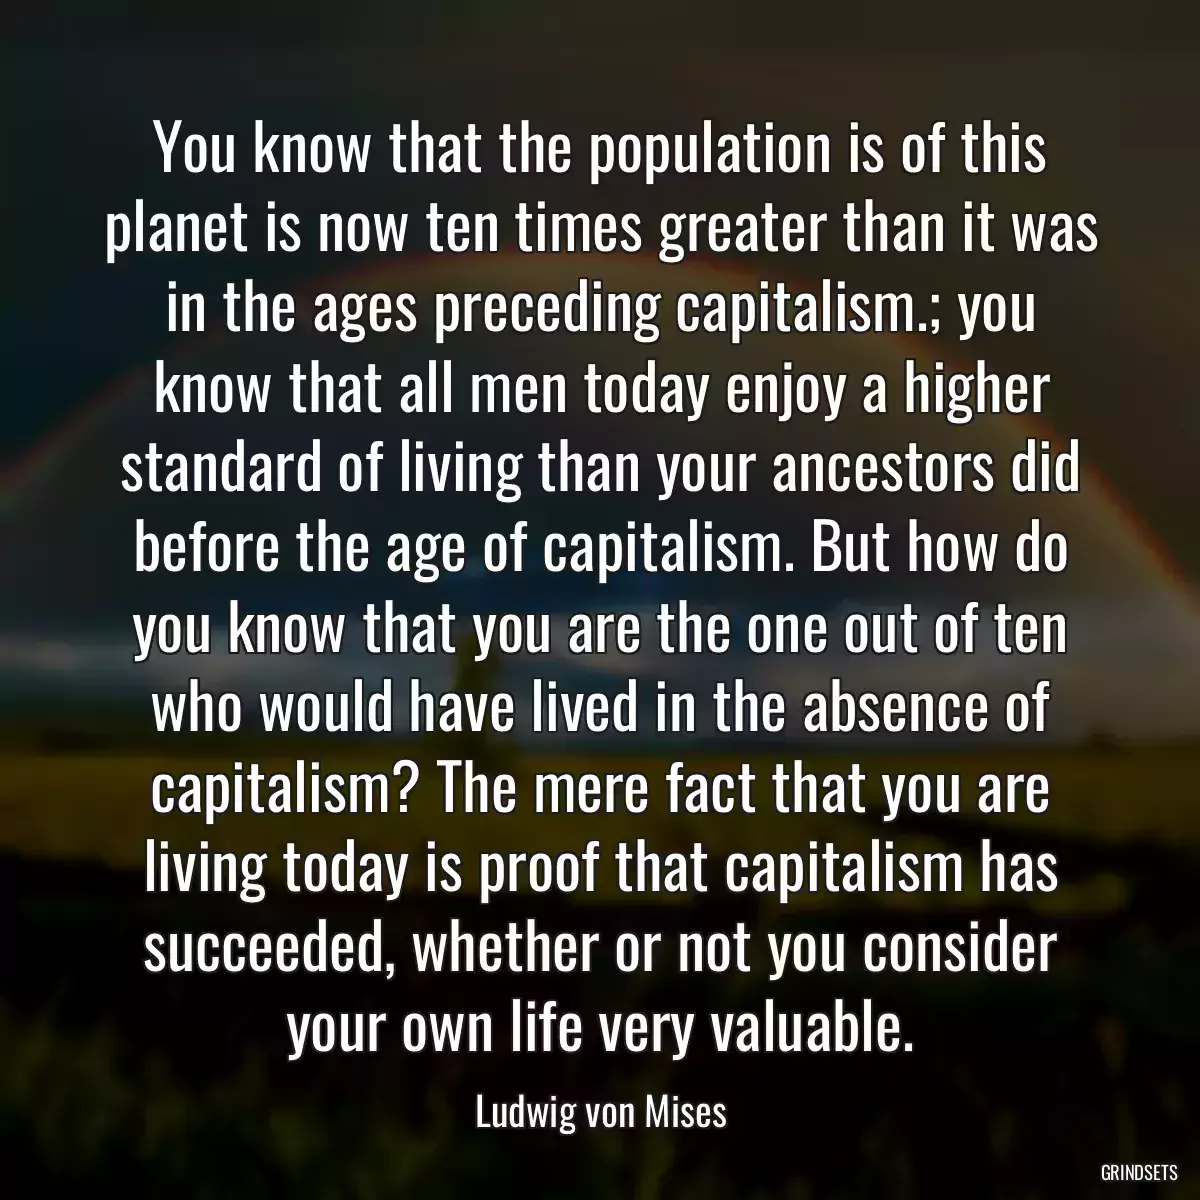 You know that the population is of this planet is now ten times greater than it was in the ages preceding capitalism.; you know that all men today enjoy a higher standard of living than your ancestors did before the age of capitalism. But how do you know that you are the one out of ten who would have lived in the absence of capitalism? The mere fact that you are living today is proof that capitalism has succeeded, whether or not you consider your own life very valuable.